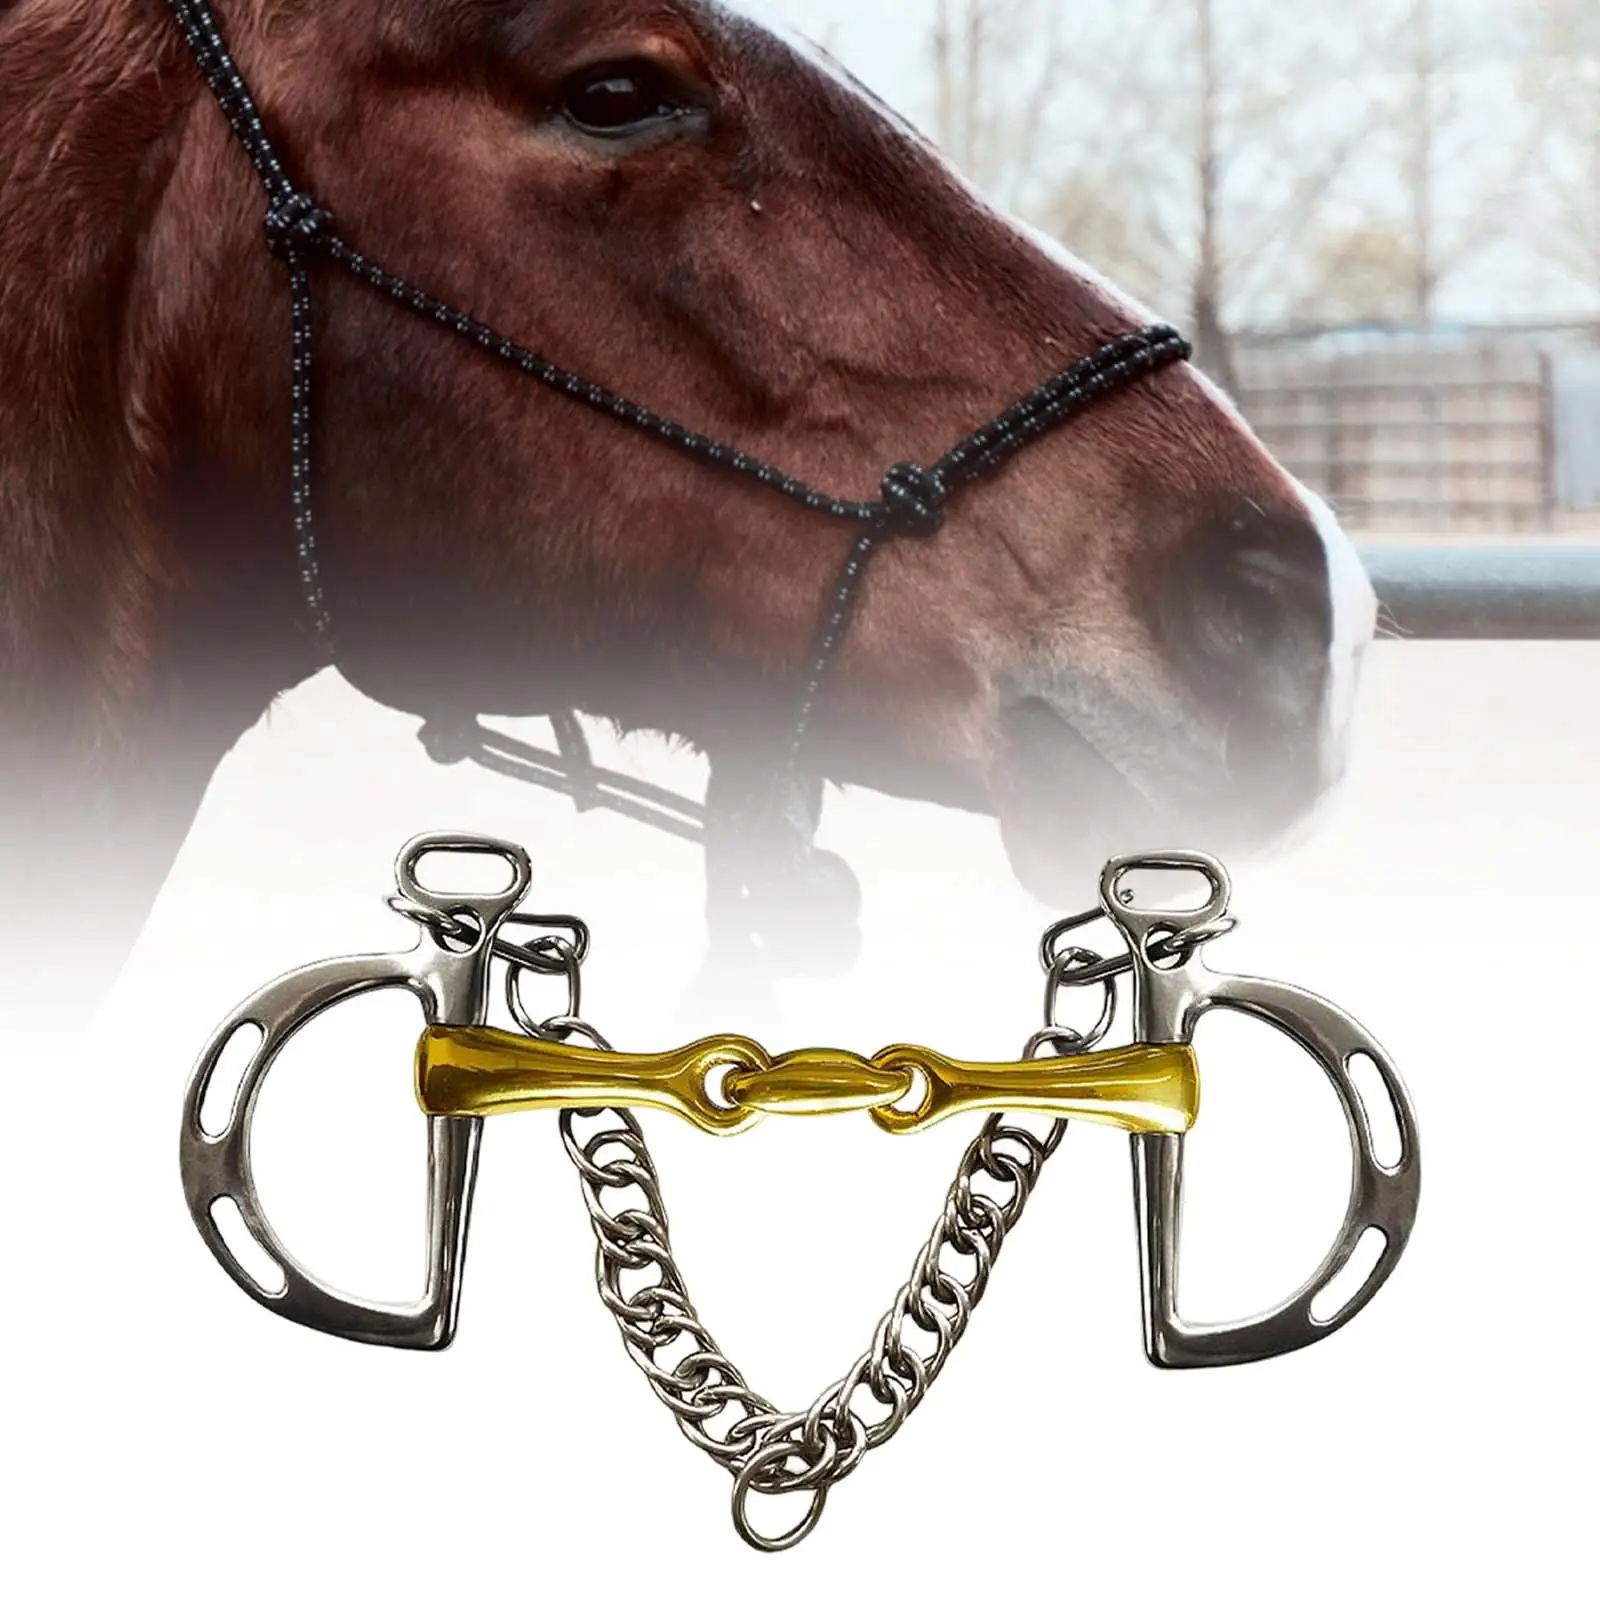 Western Style Horse Bit, Copper Mouth with Curb Hooks Chain with Silver Trims